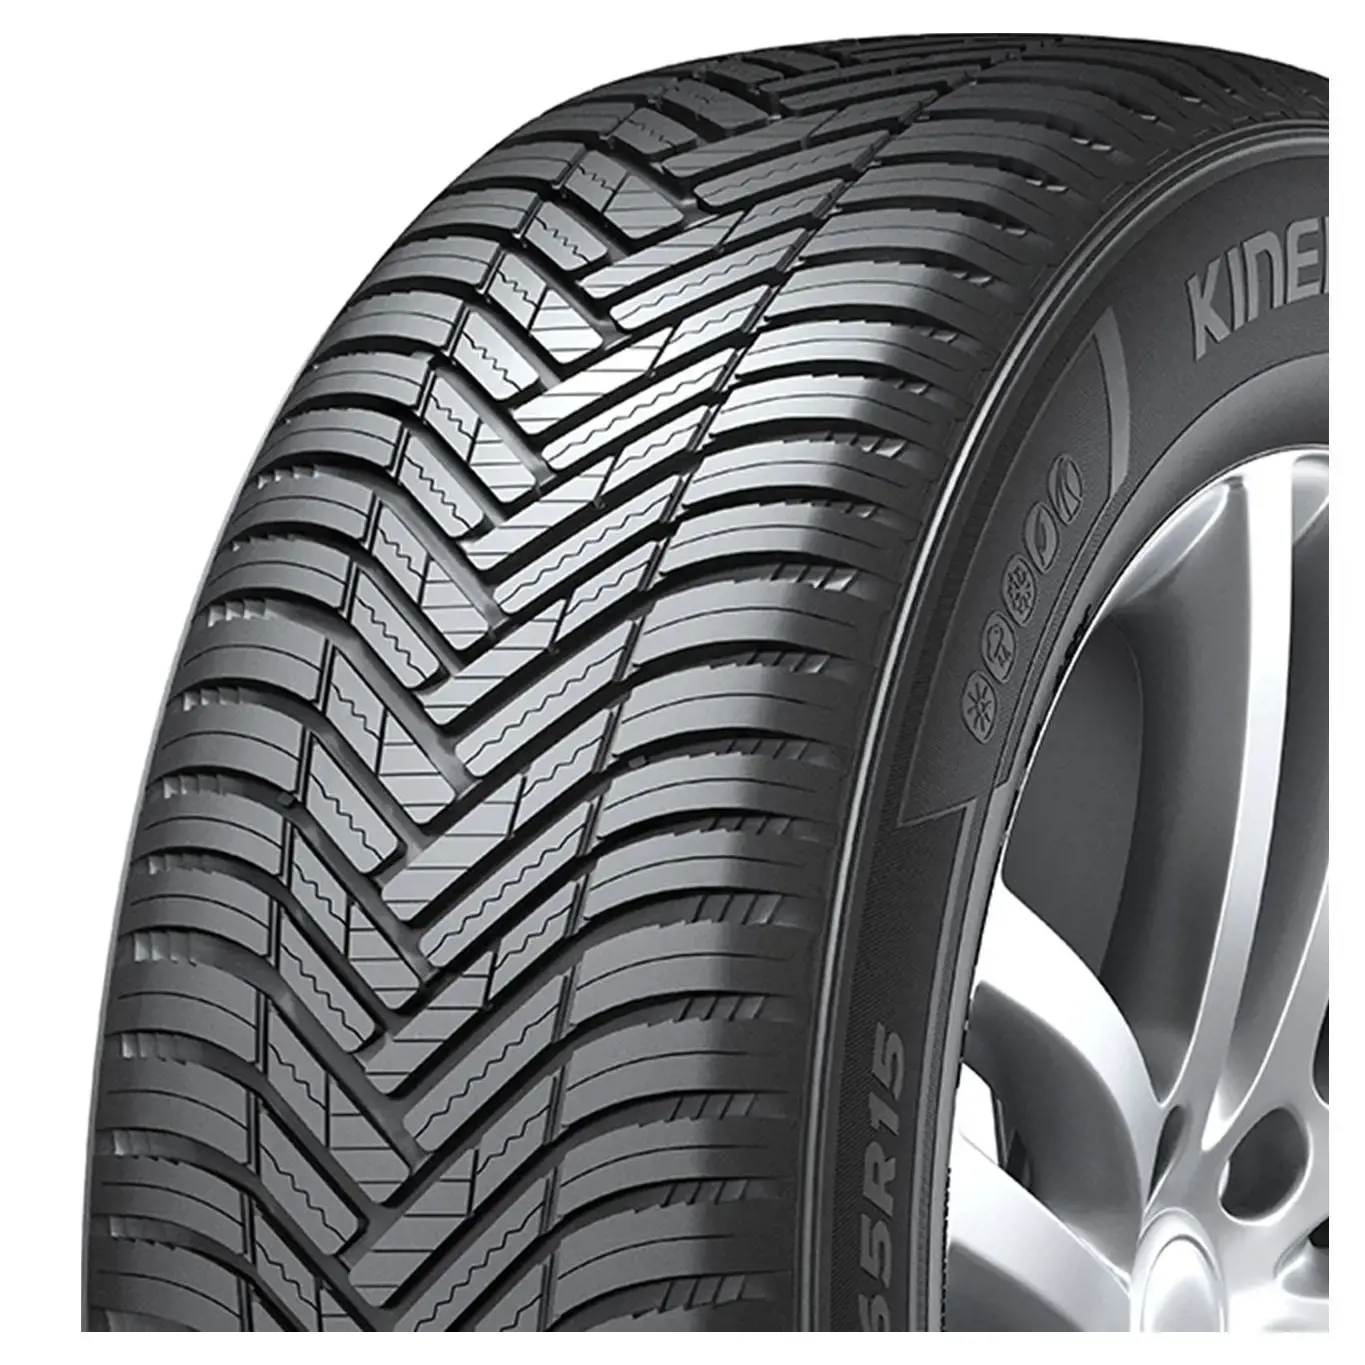 245/45 R18 100Y KInERGy 4S 2 H750 XL M+S